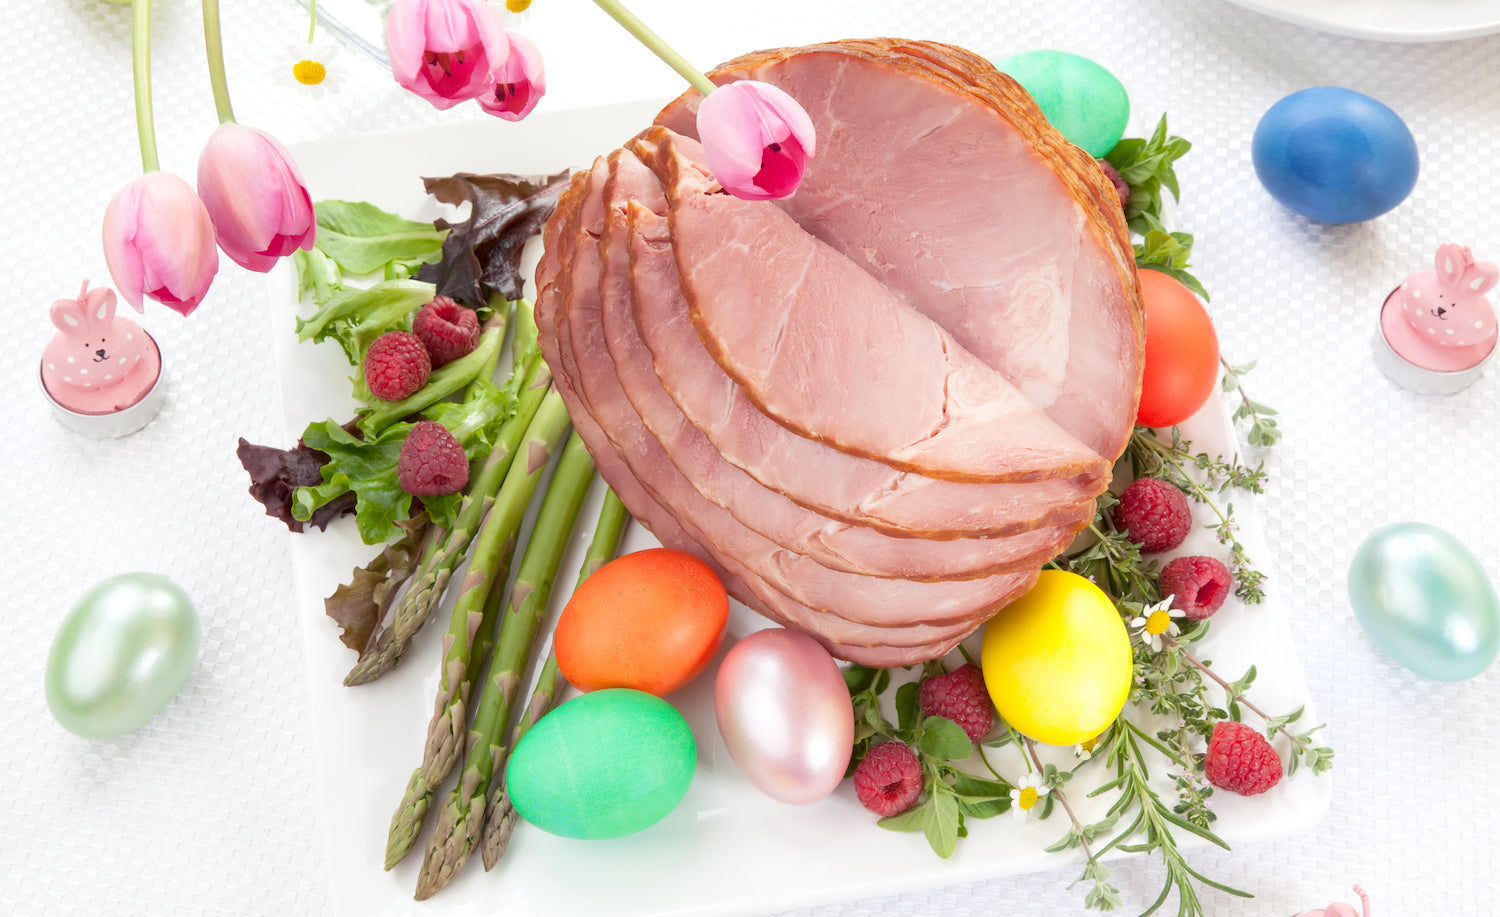 Go HAM with Your Easter Leftovers